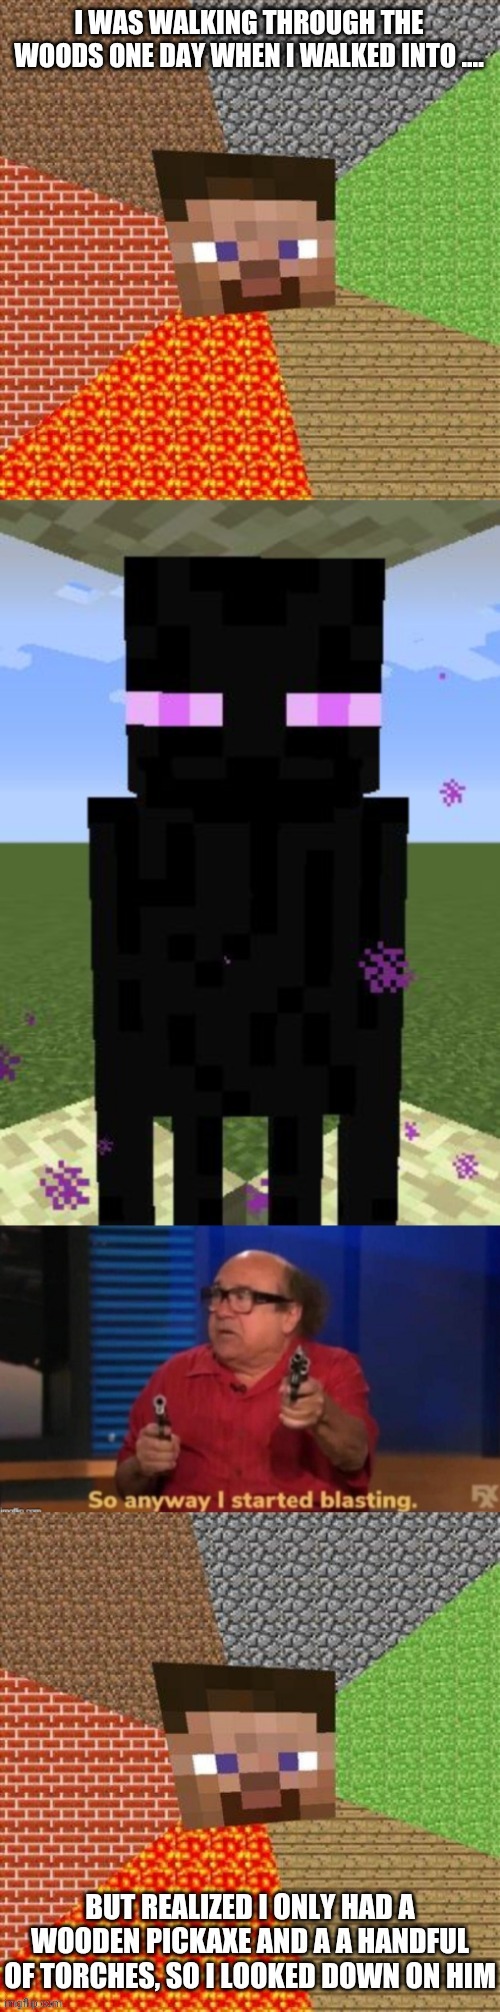 Don't look him in the eyes! | image tagged in minecraft,minecraft steve,enderman | made w/ Imgflip meme maker